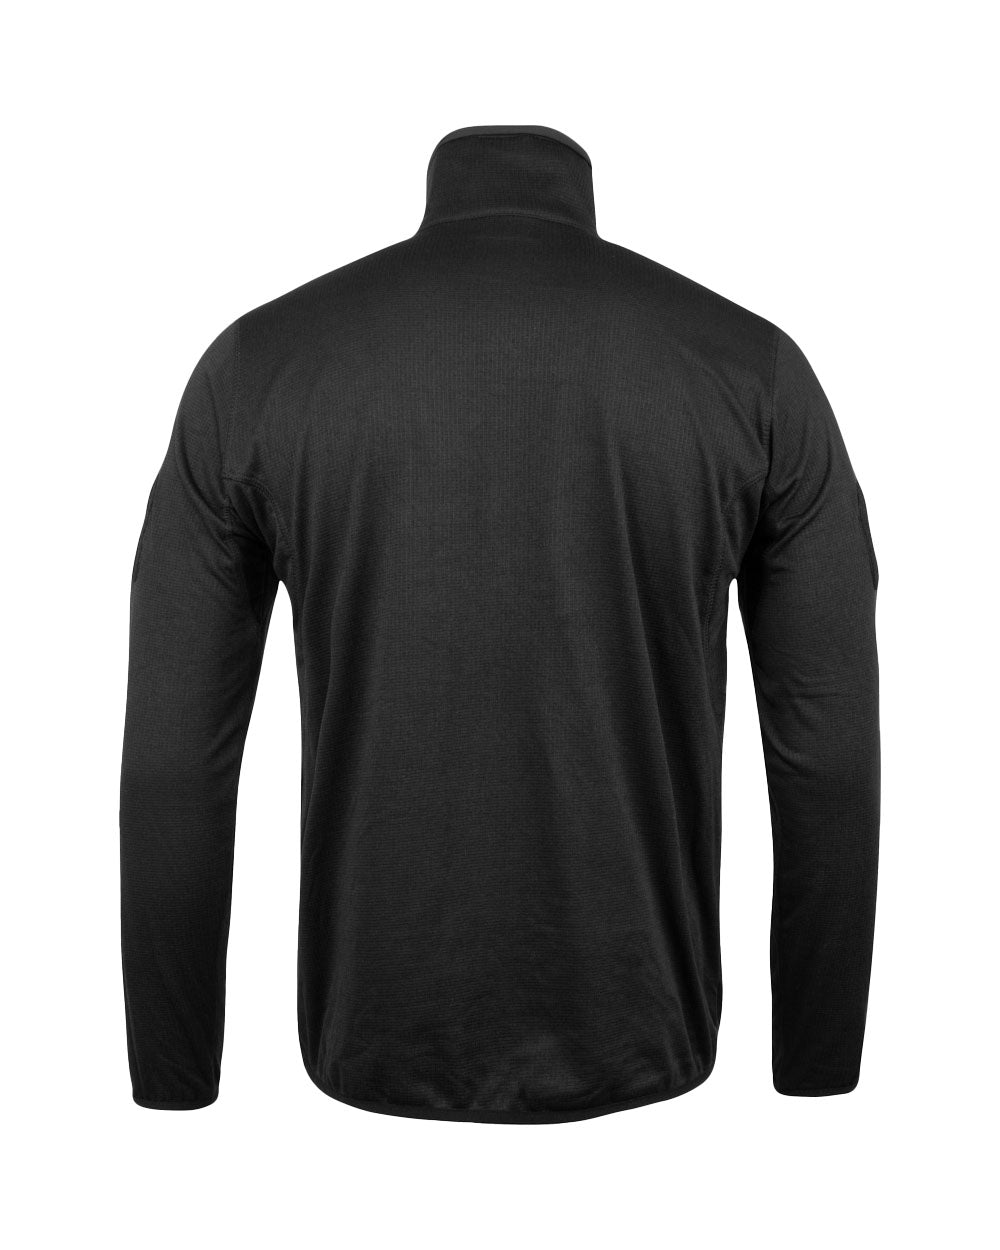 Black coloured Viper Tech Mid Layer Fleece Top on White background 